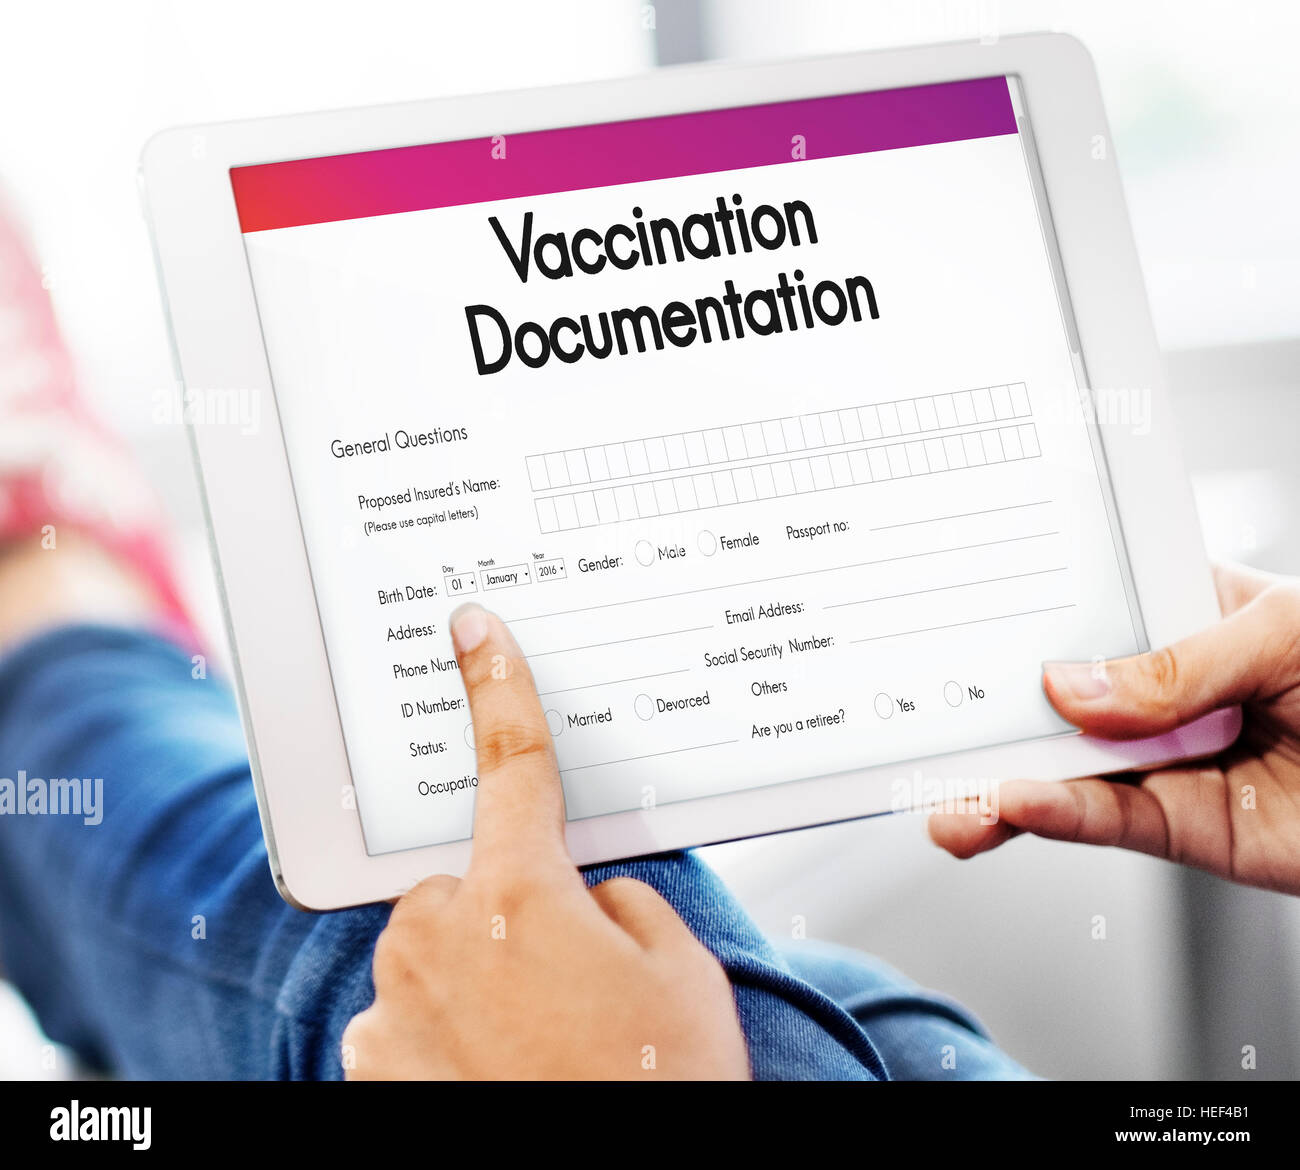 Vaccination Documentation Medical care Concept Stock Photo